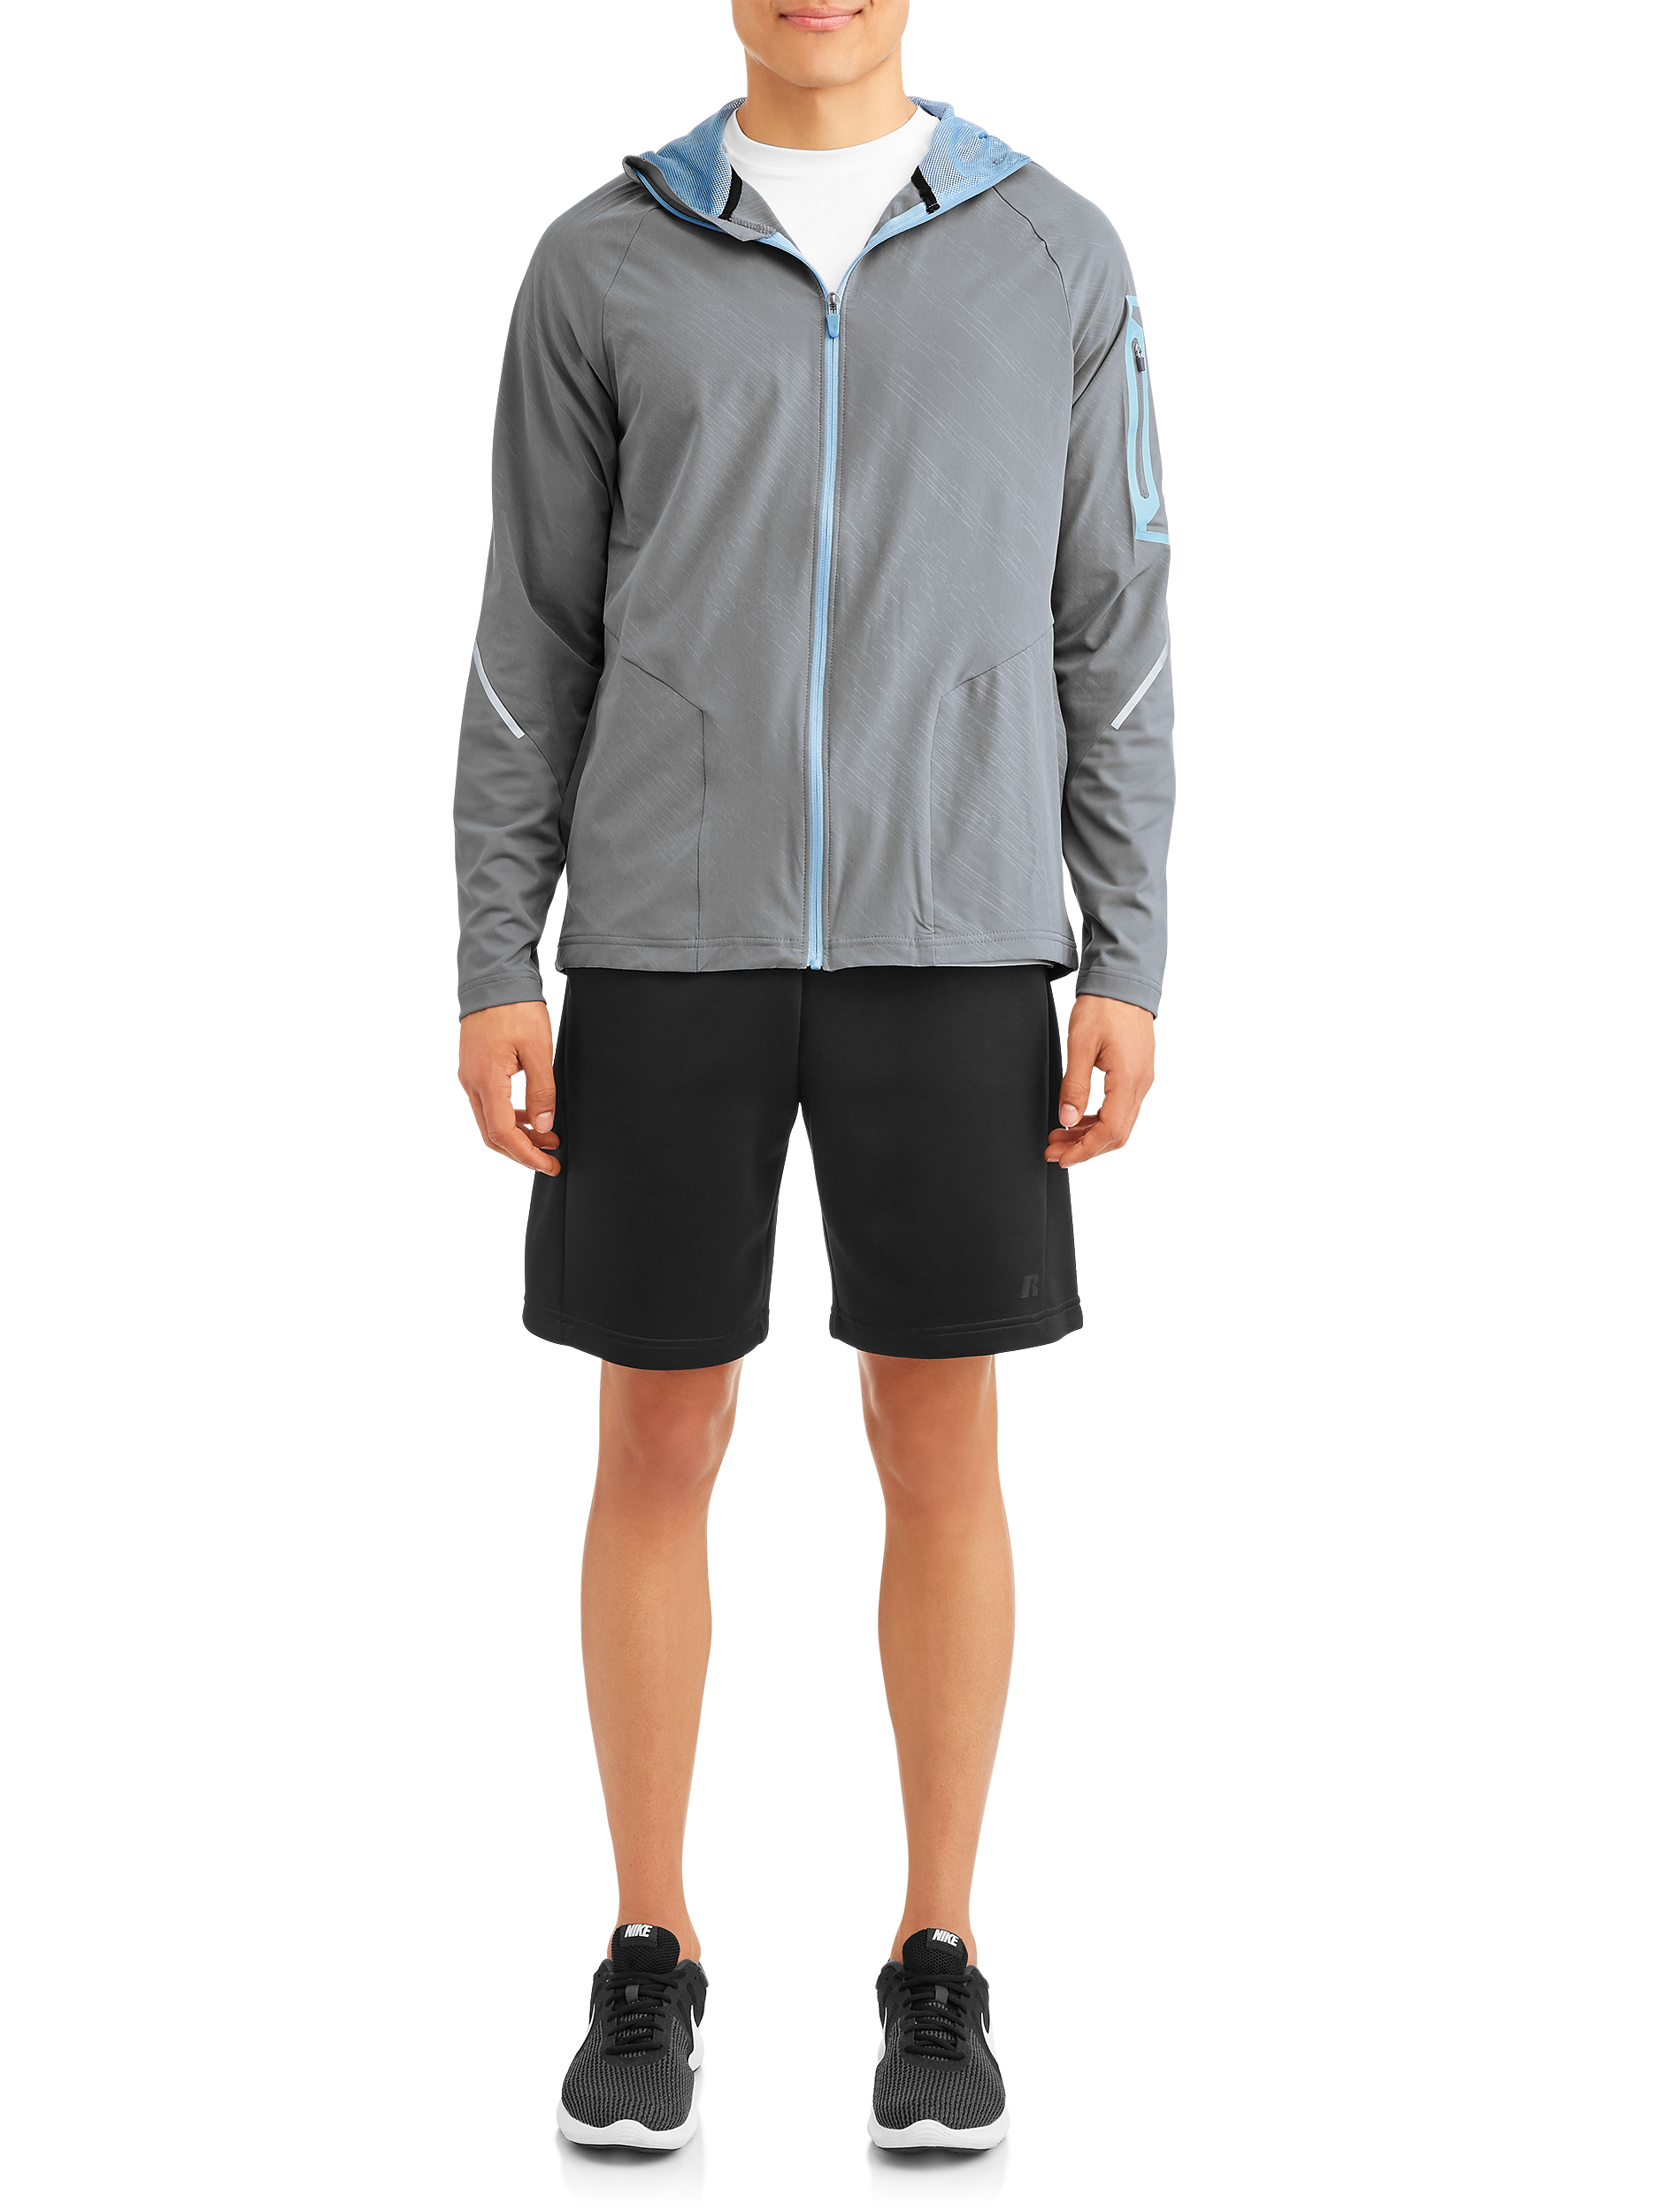 Russell Exclusive Men's Core Performance Jacket - image 4 of 4